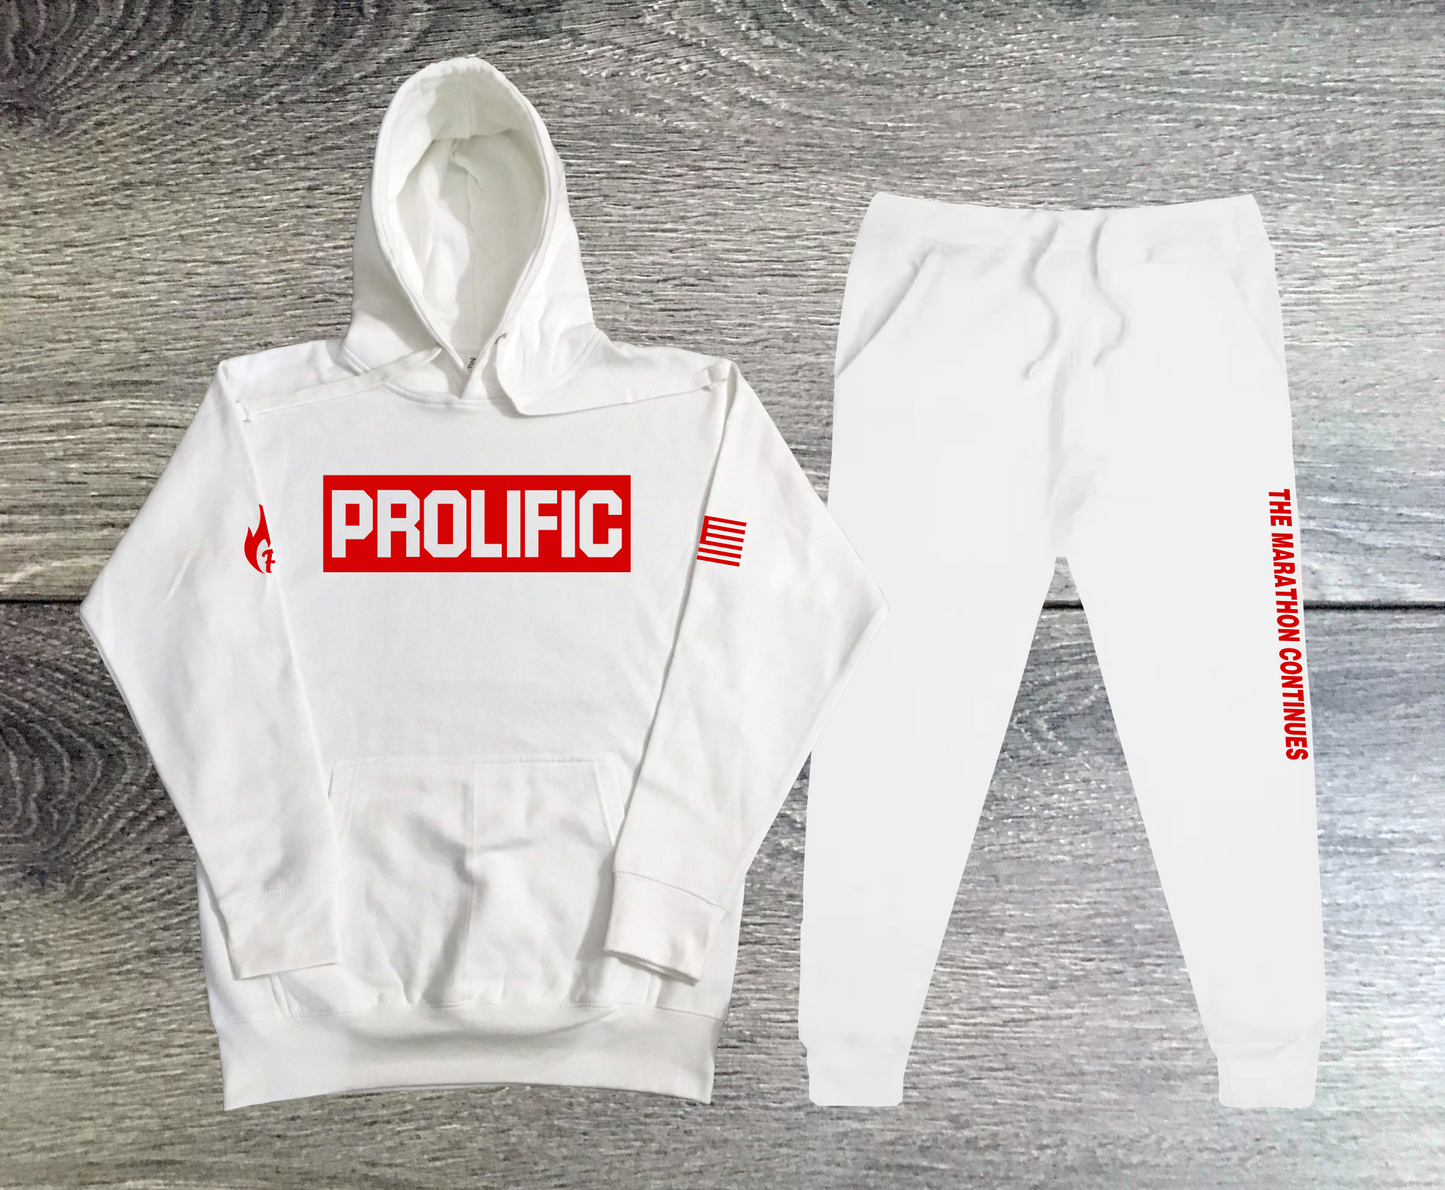 Threads On Fire PROLIFIC White Hoodie Joggers Sweatsuit 